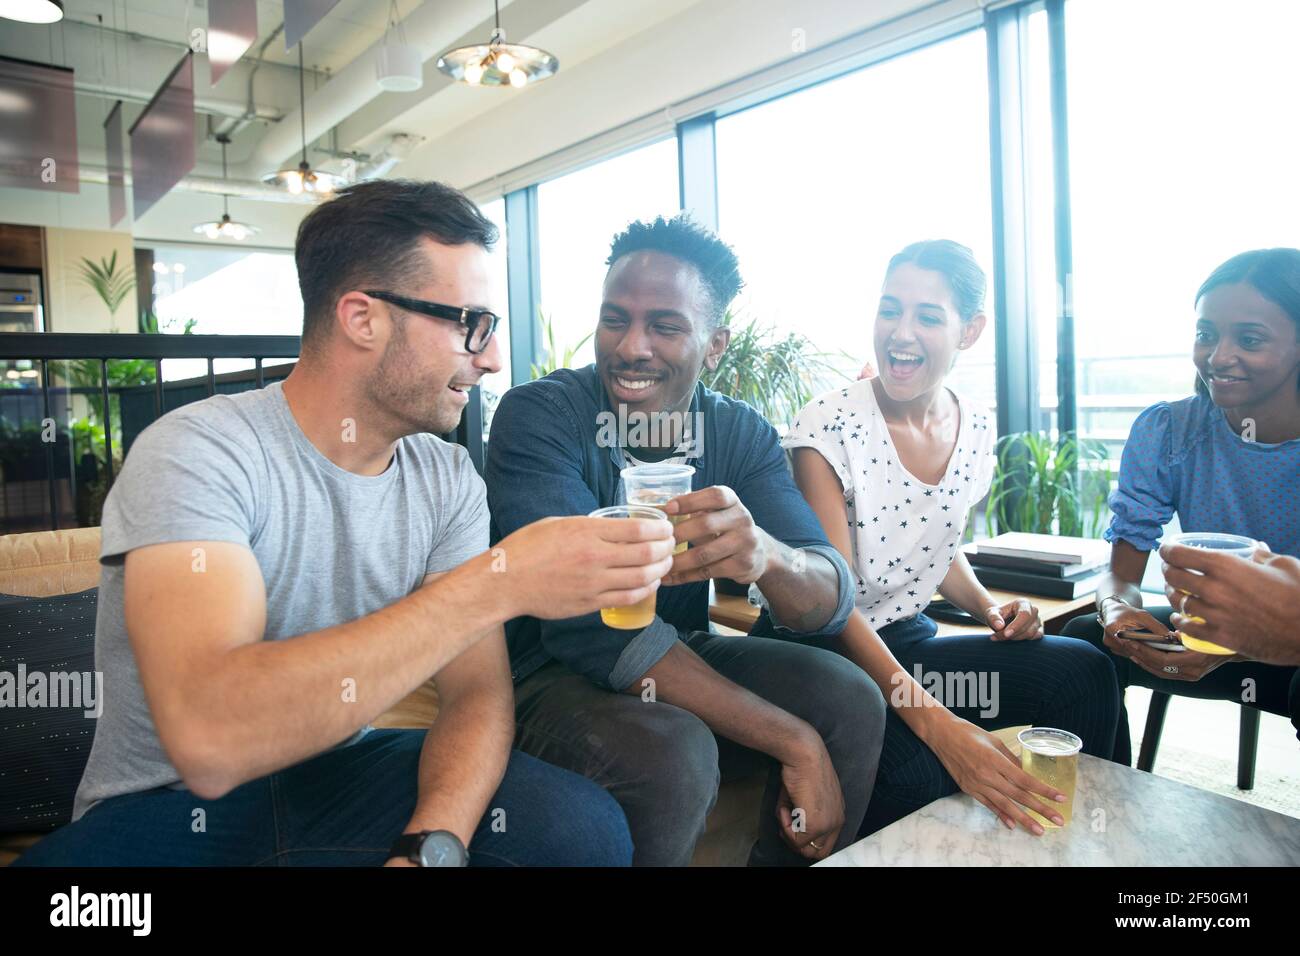 Happy business people celebrating with beers in office Stock Photo